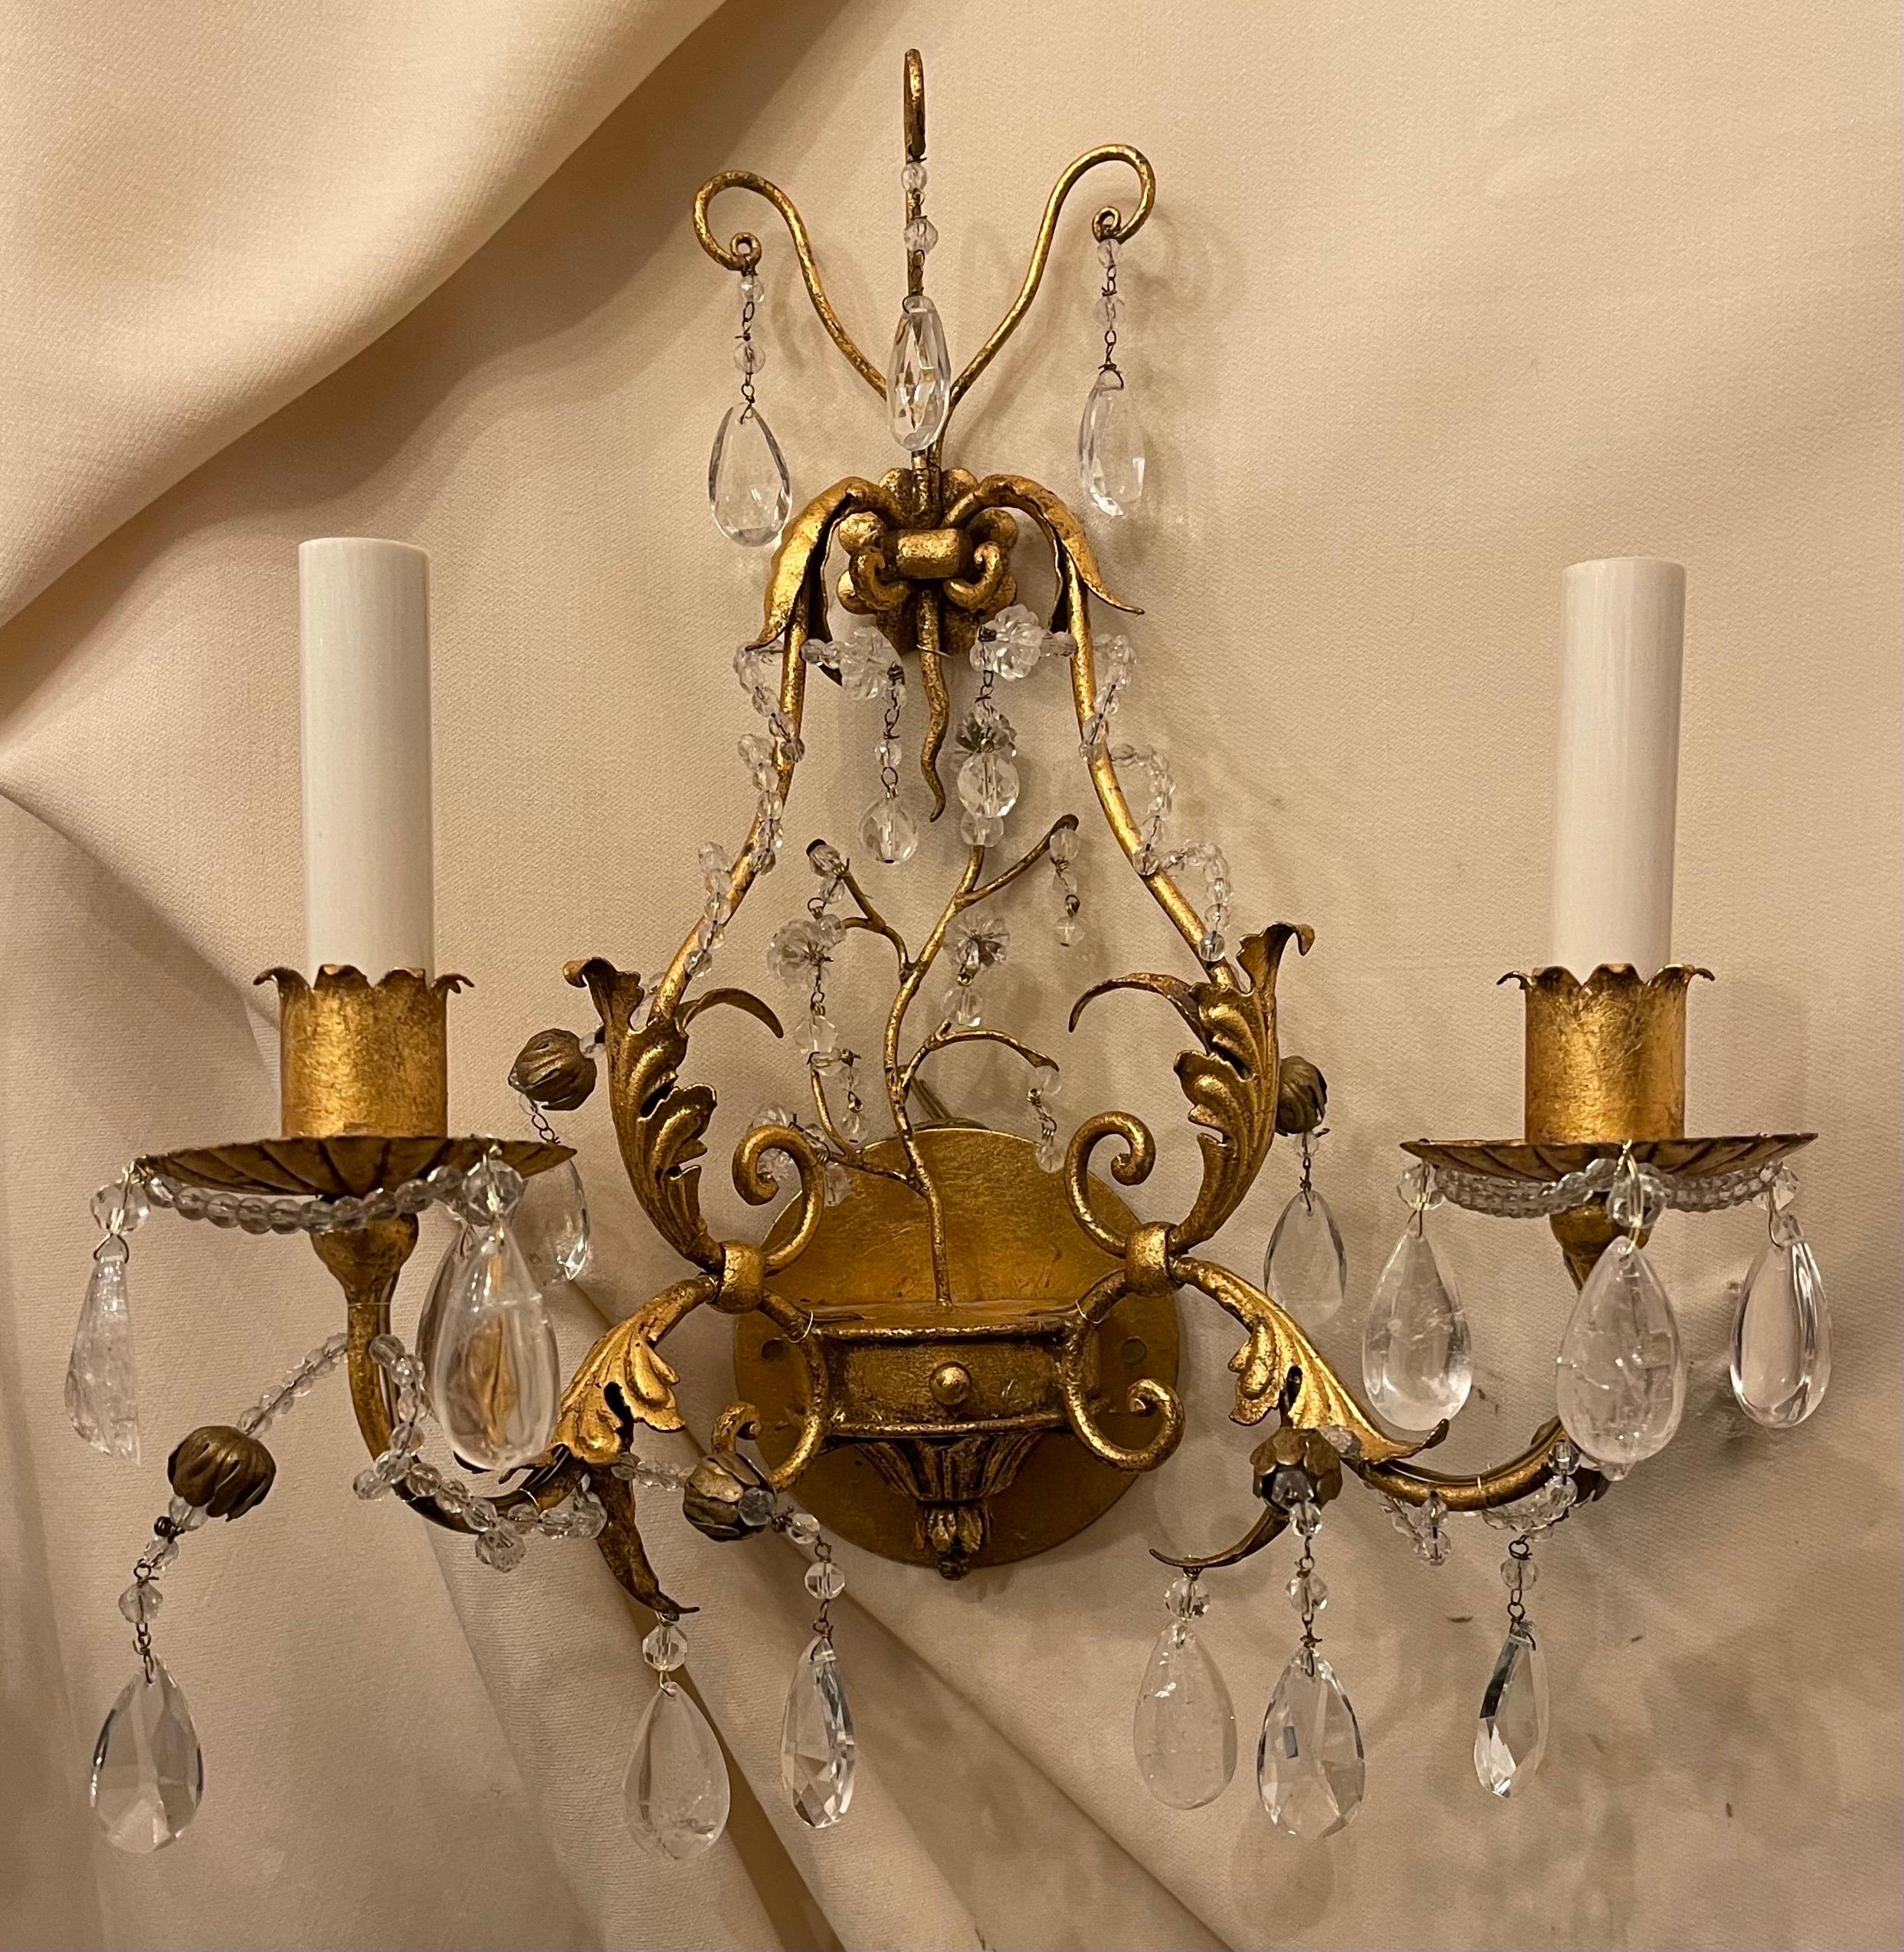 A Wonderful Pair of French Maison Baguès Style Gold Gilt With Rock crystal & Crystal Drops And Beading Throughout And A Tree Leaf Bouquet Center Sconces
Rewired And Ready To Install With Mounting Hardware.